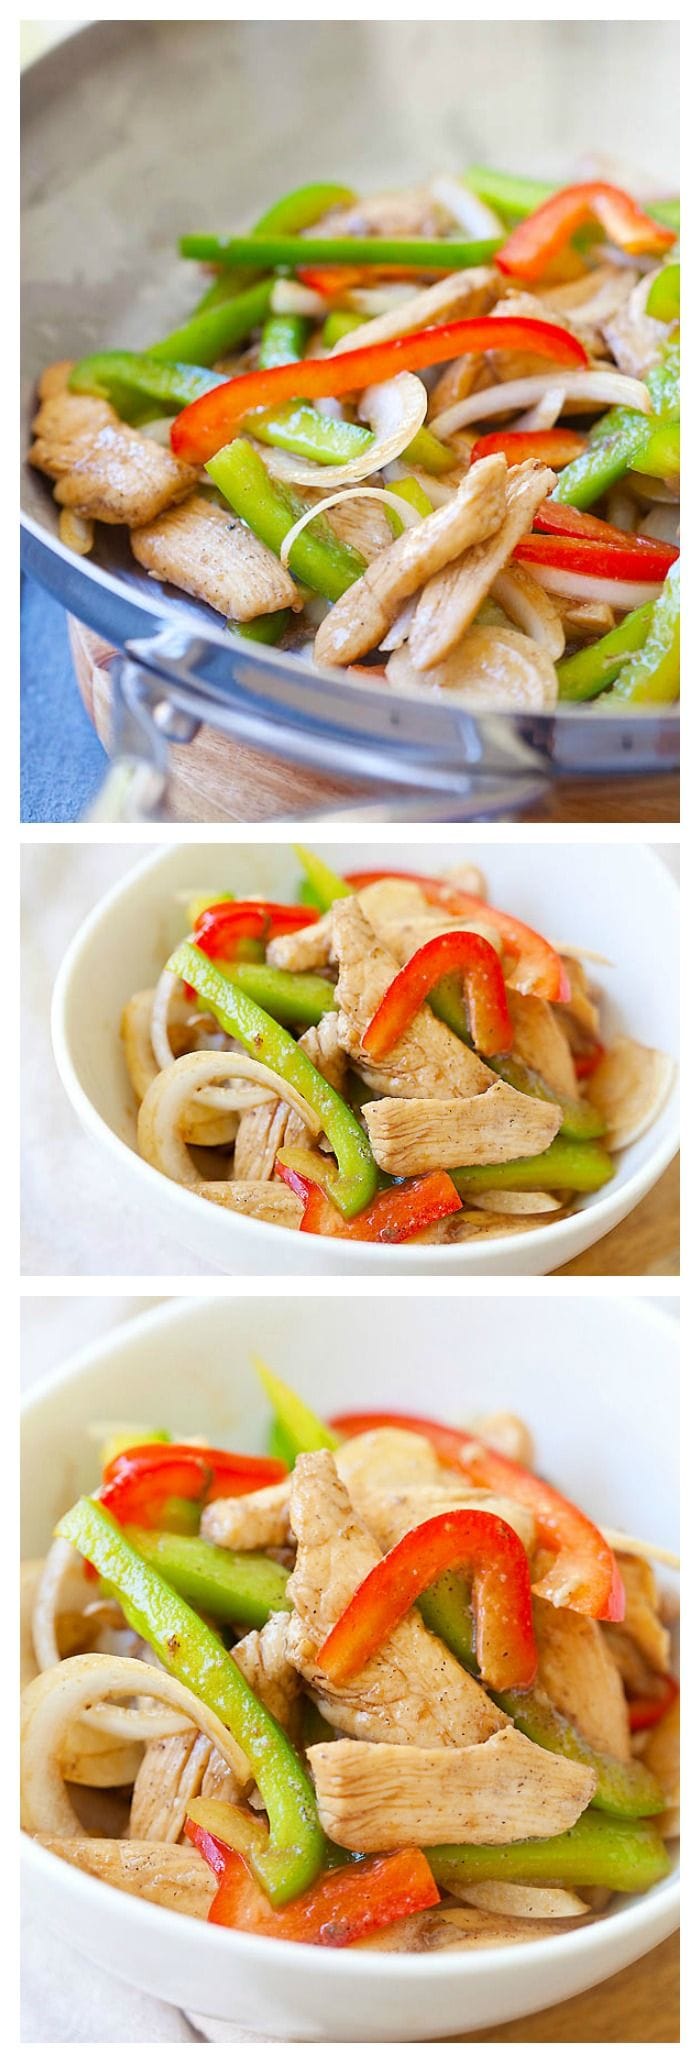 Black pepper chicken is a delicious and easy recipe to make at home, with only a few ingredients: black pepper, chicken, onion and bell pepper | rasamalaysia.com